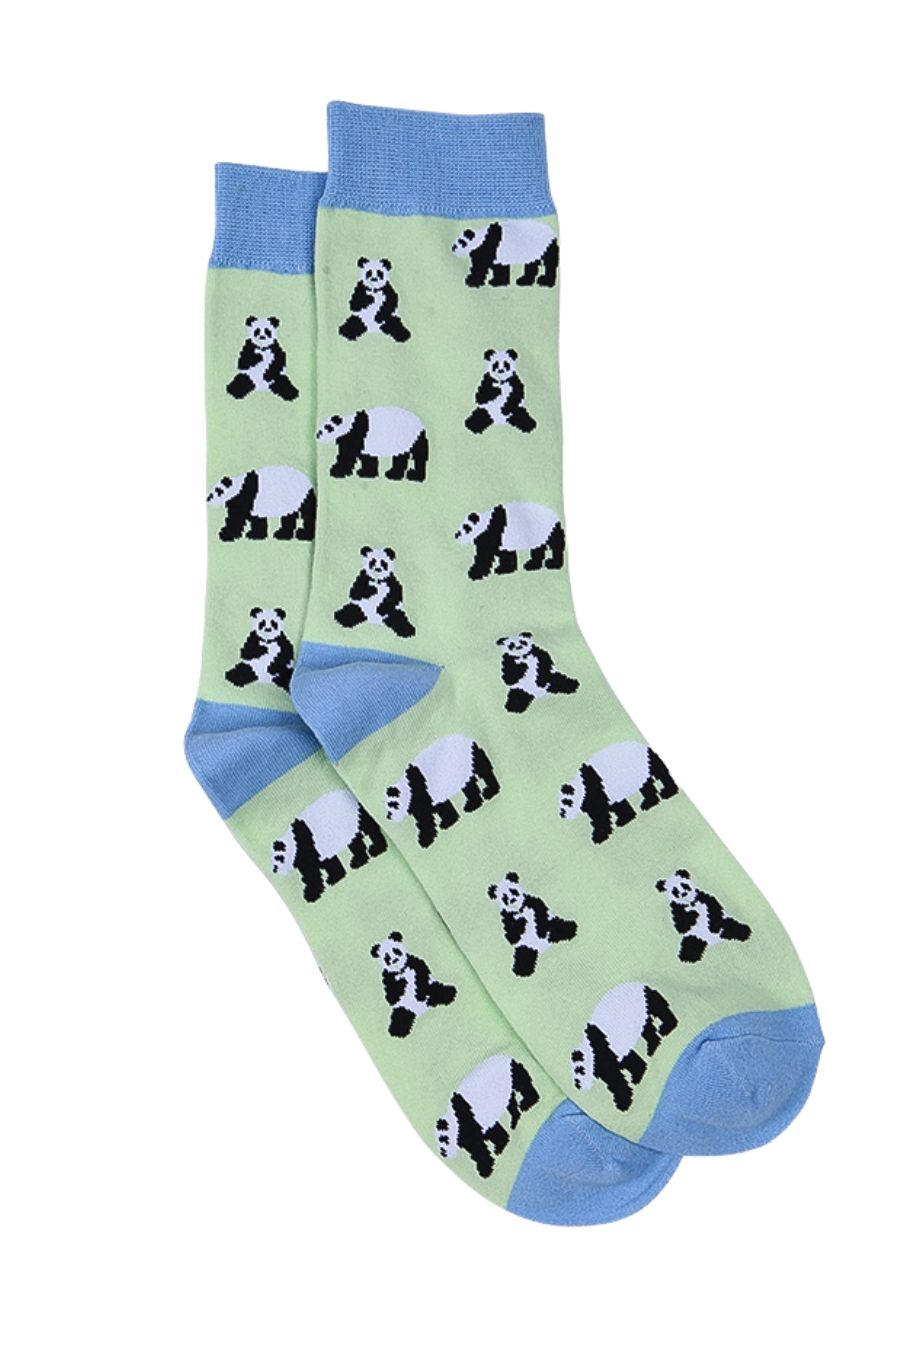 light green socks with a light blue heel, toe and cuff with an all over pattern of panda bears